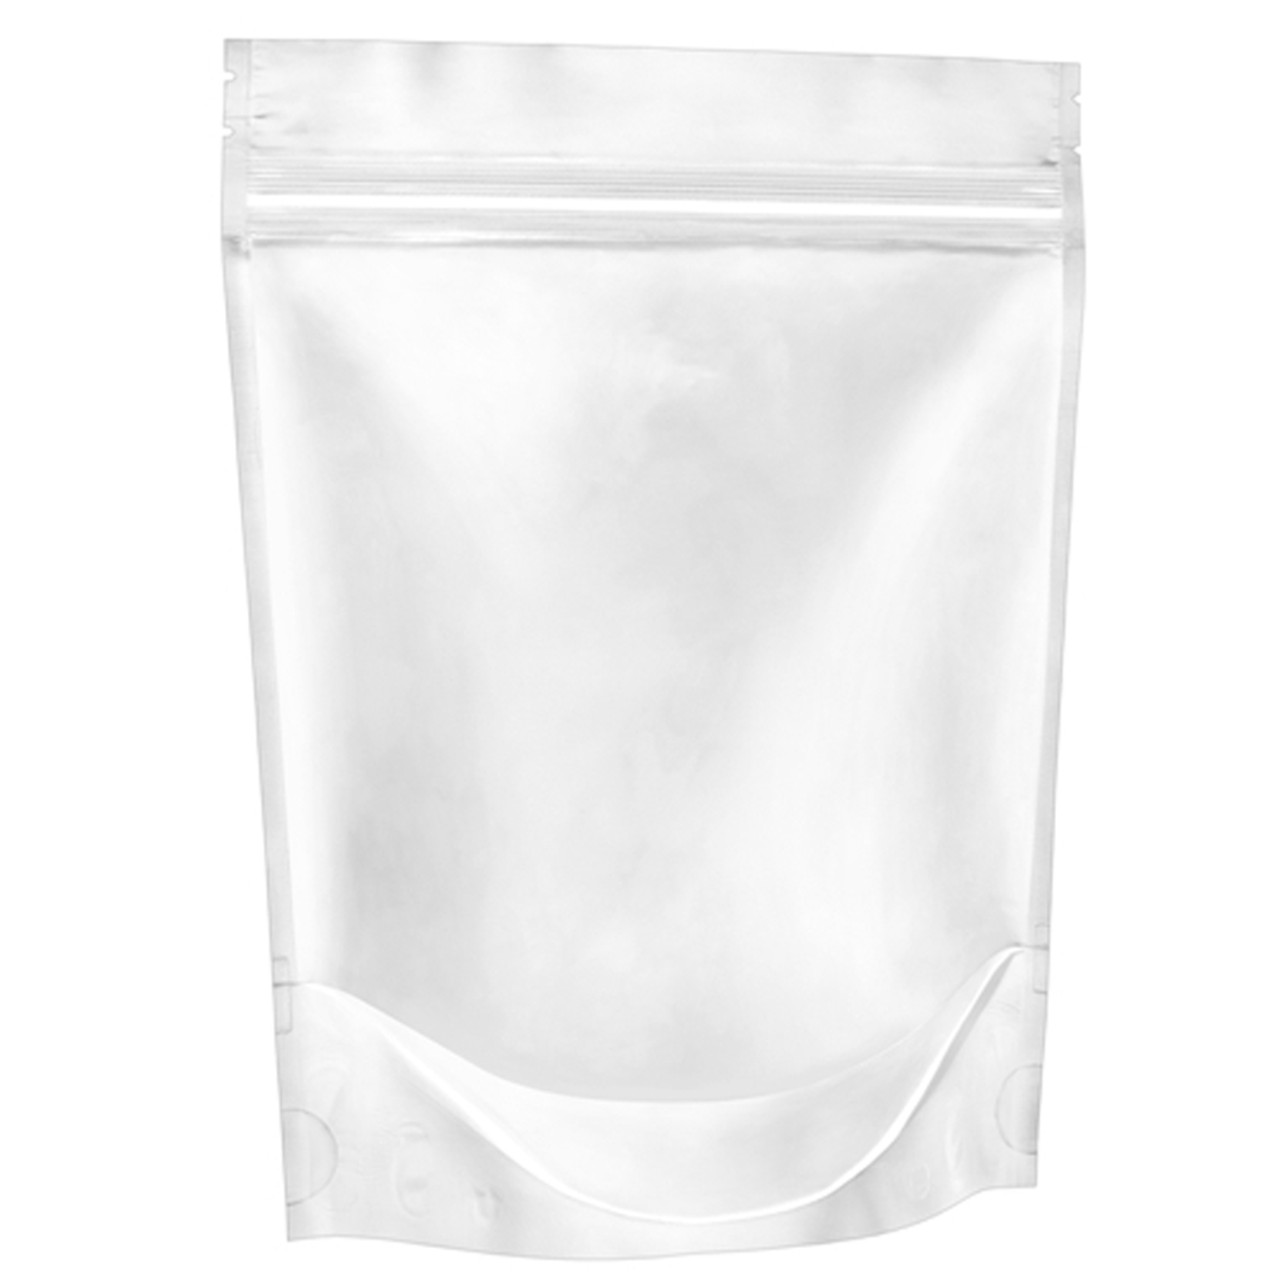 Resealable Heat-Seal Bags, 6 x 9 4 mil Stand-Up Foil Zipper Bags, case/500